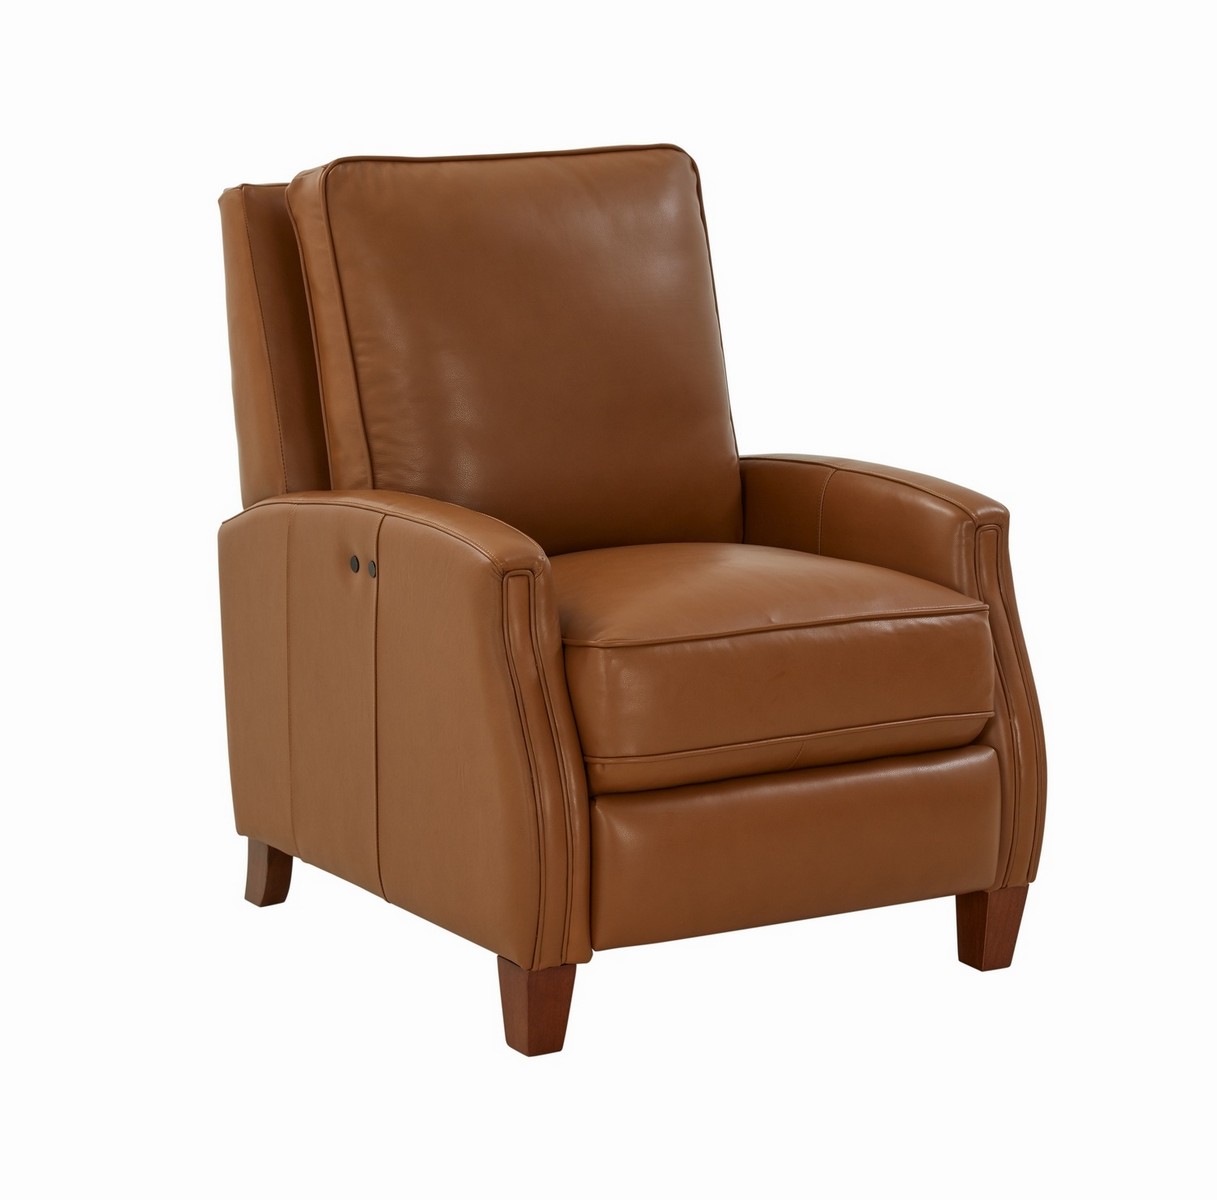 Barcalounger Penrose Power Recliner Chair - Shoreham Ponytail/All Leather